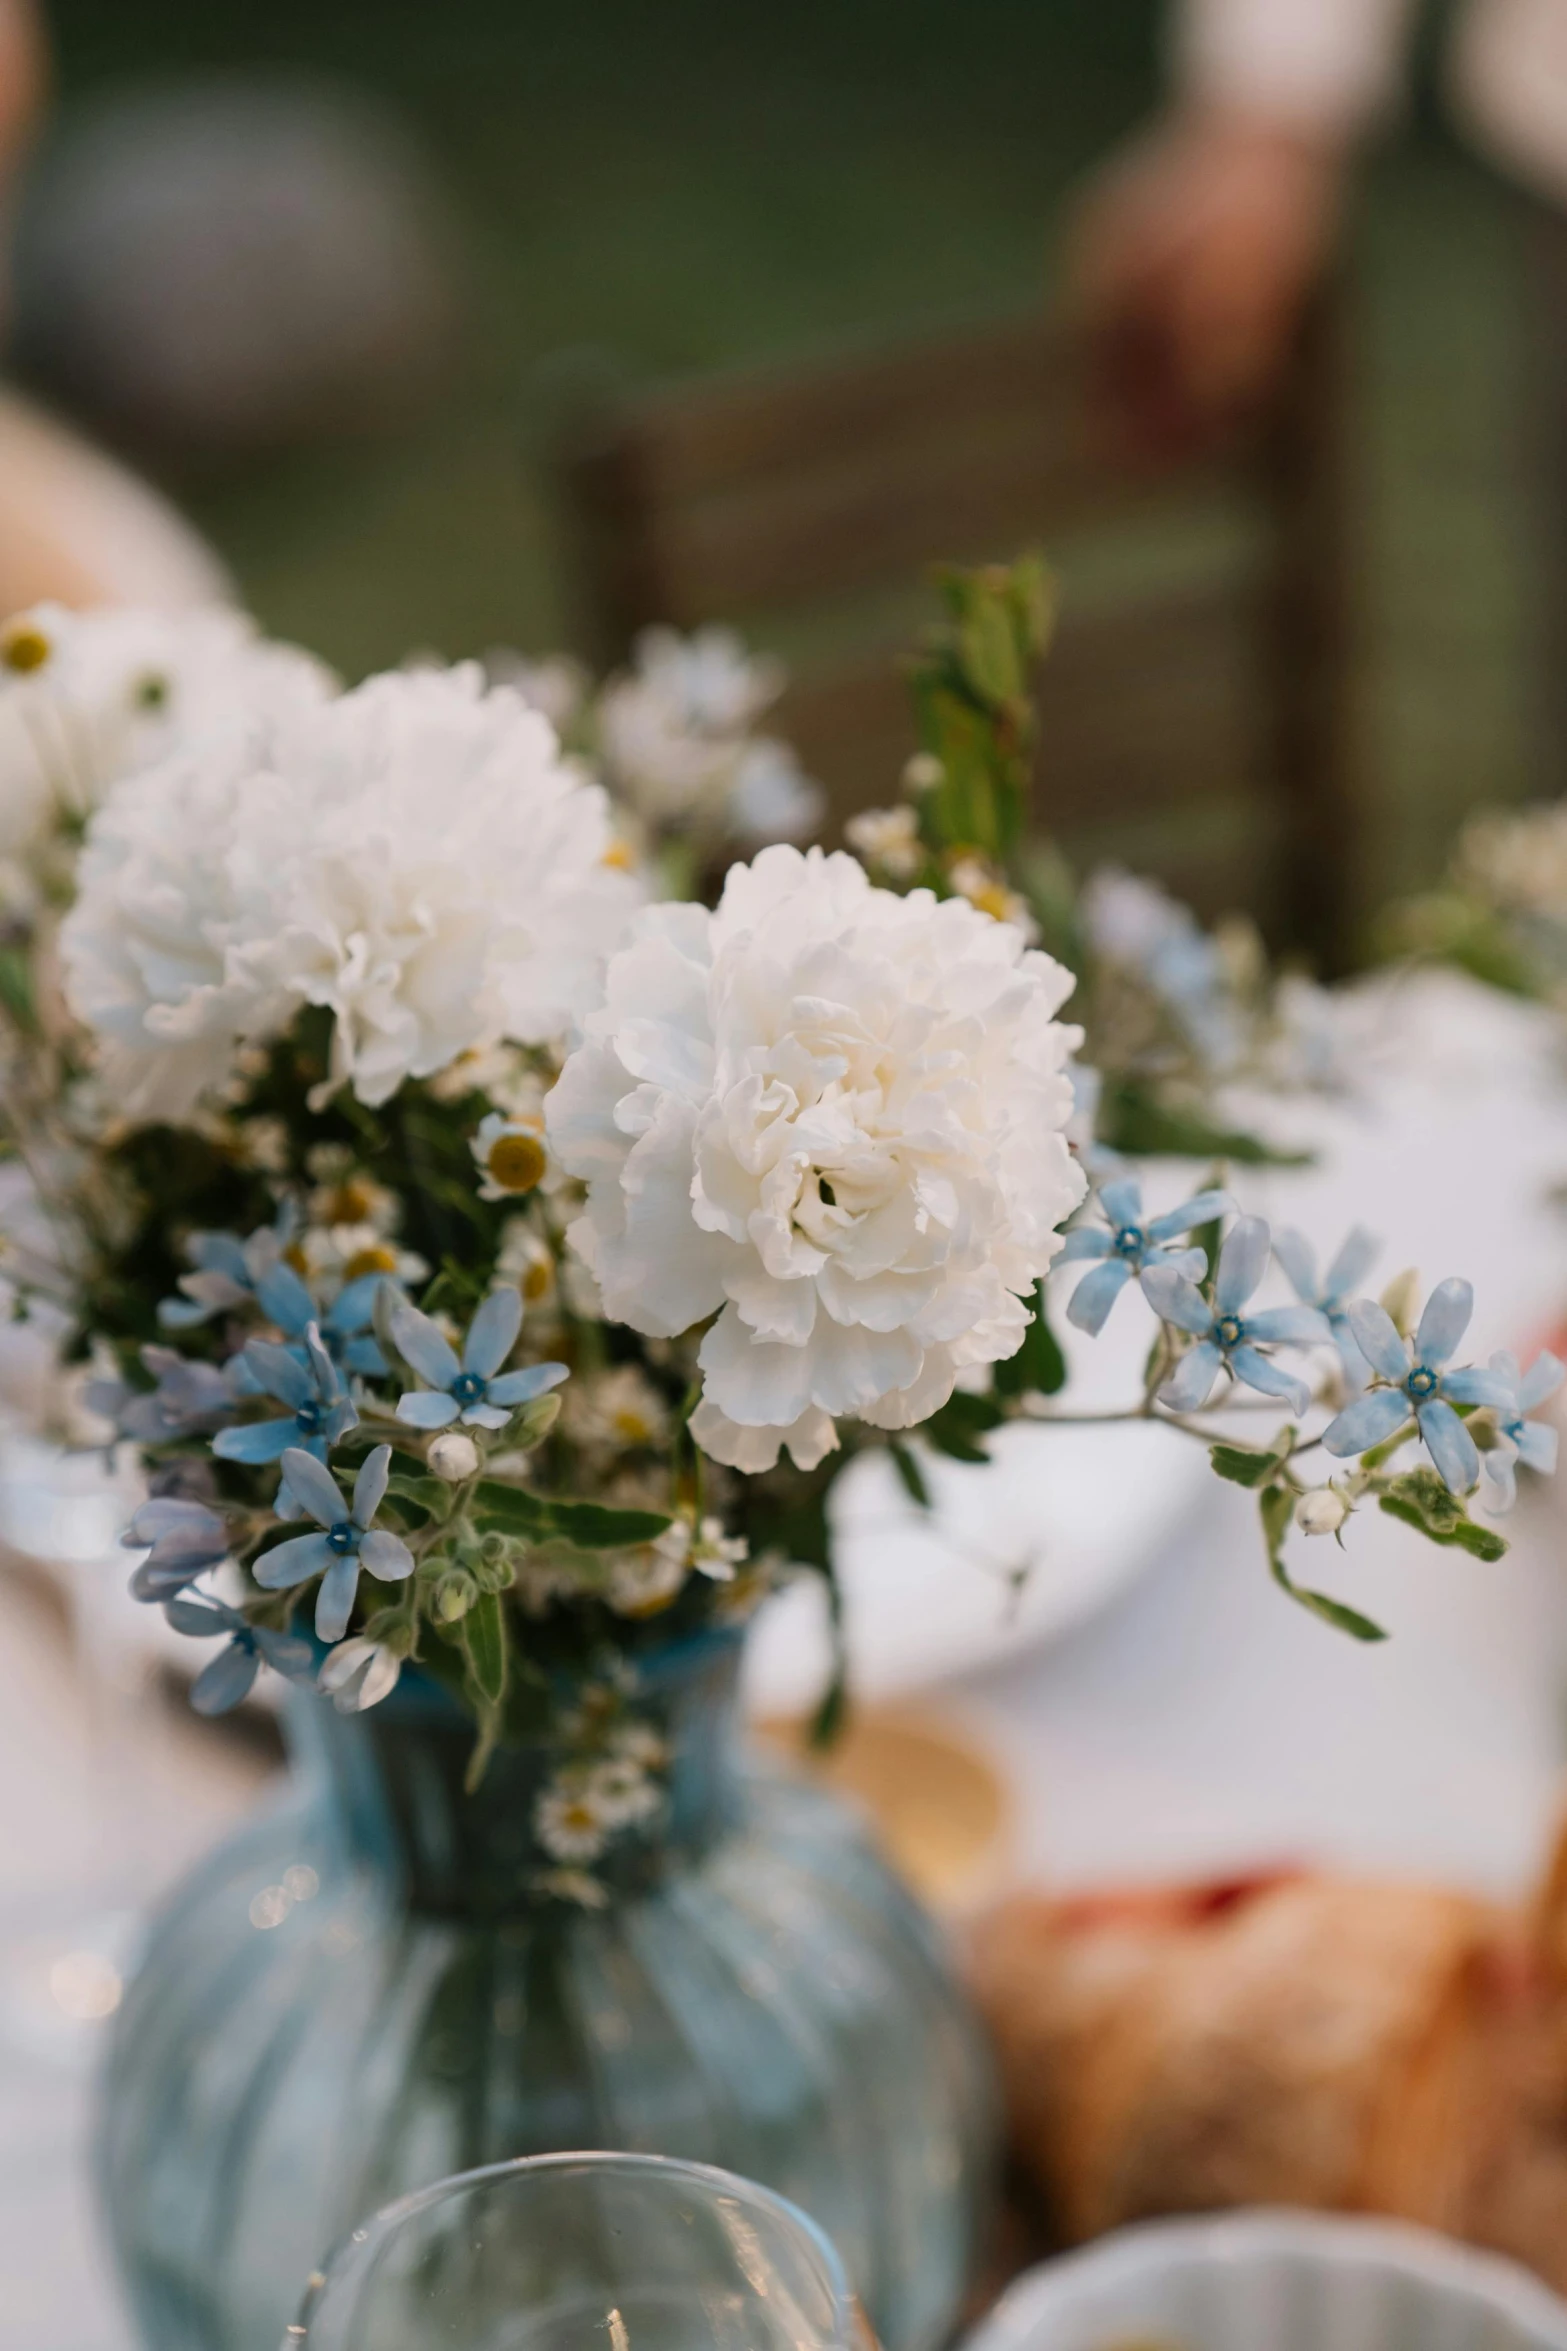 a vase filled with white flowers sitting on top of a table, by Jessie Algie, unsplash, amber and blue color scheme, al fresco, celebration, detail shot